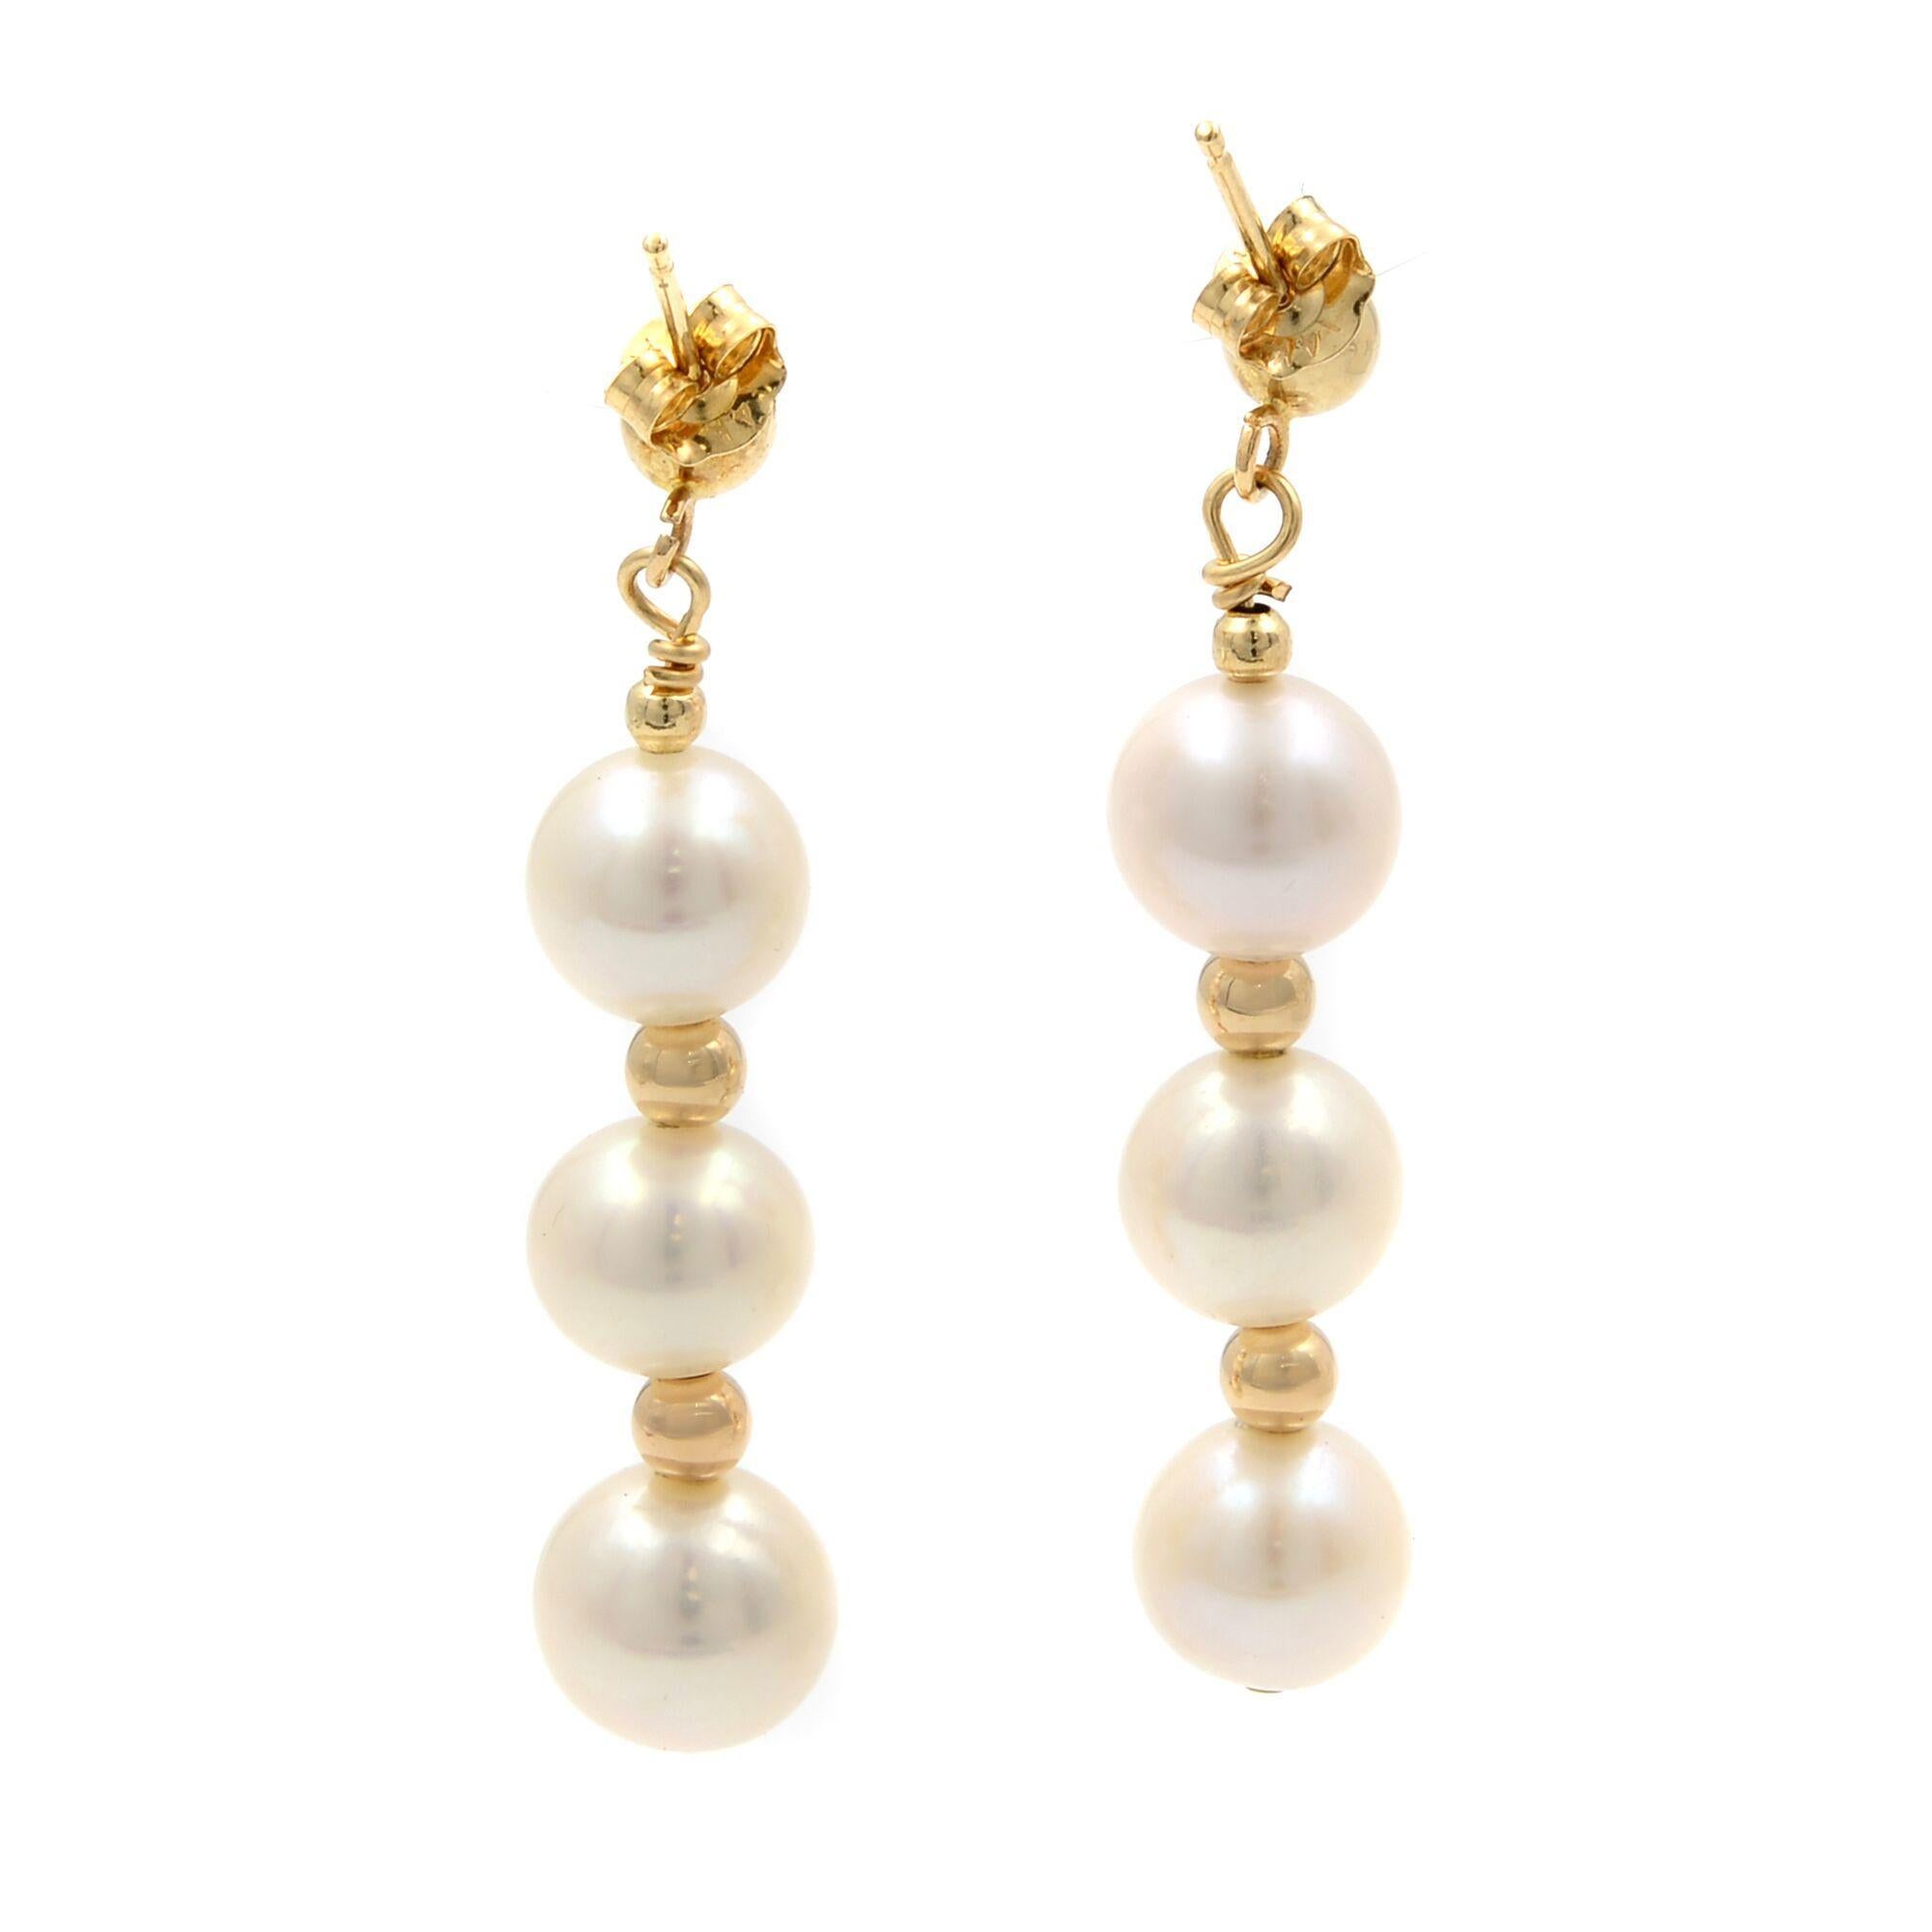 Beautiful freshwater white pearl drop earrings crafted in 14k yellow gold. Put on the perfect finishing touch with these all-natural cultured freshwater pearls earrings. 3 pearls on each earring. Each pearl measures 7mm, earring length is 35mm.